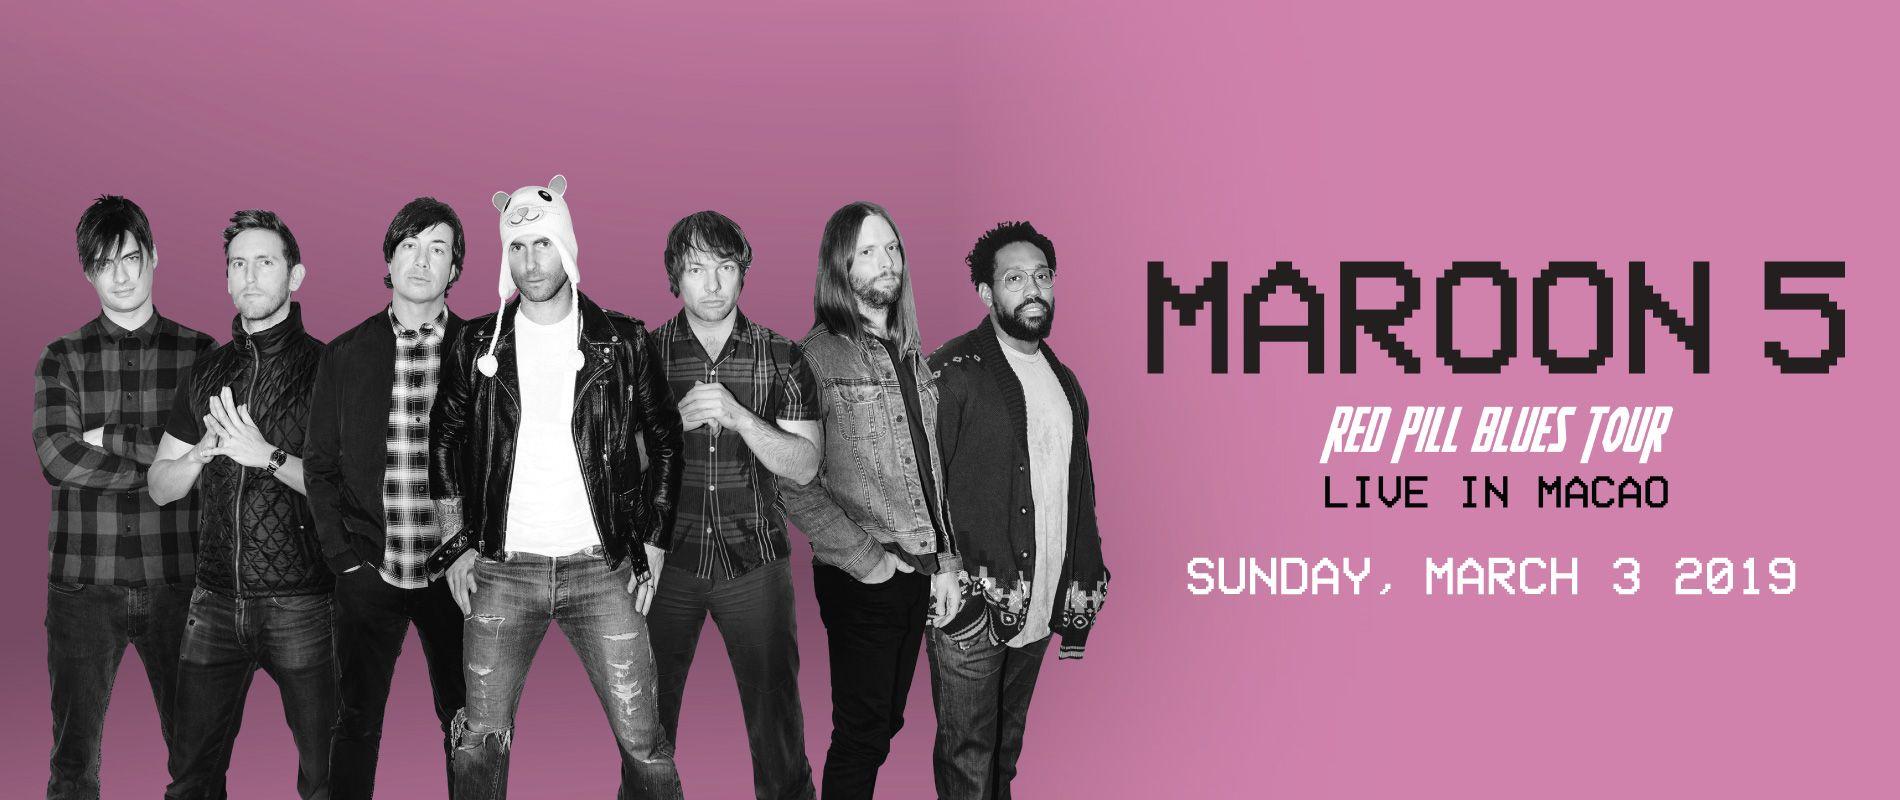 Red Maroon 5 Logo - MAROON 5 RED PILL BLUES TOUR LIVE IN MACAO | Entertainment | The ...